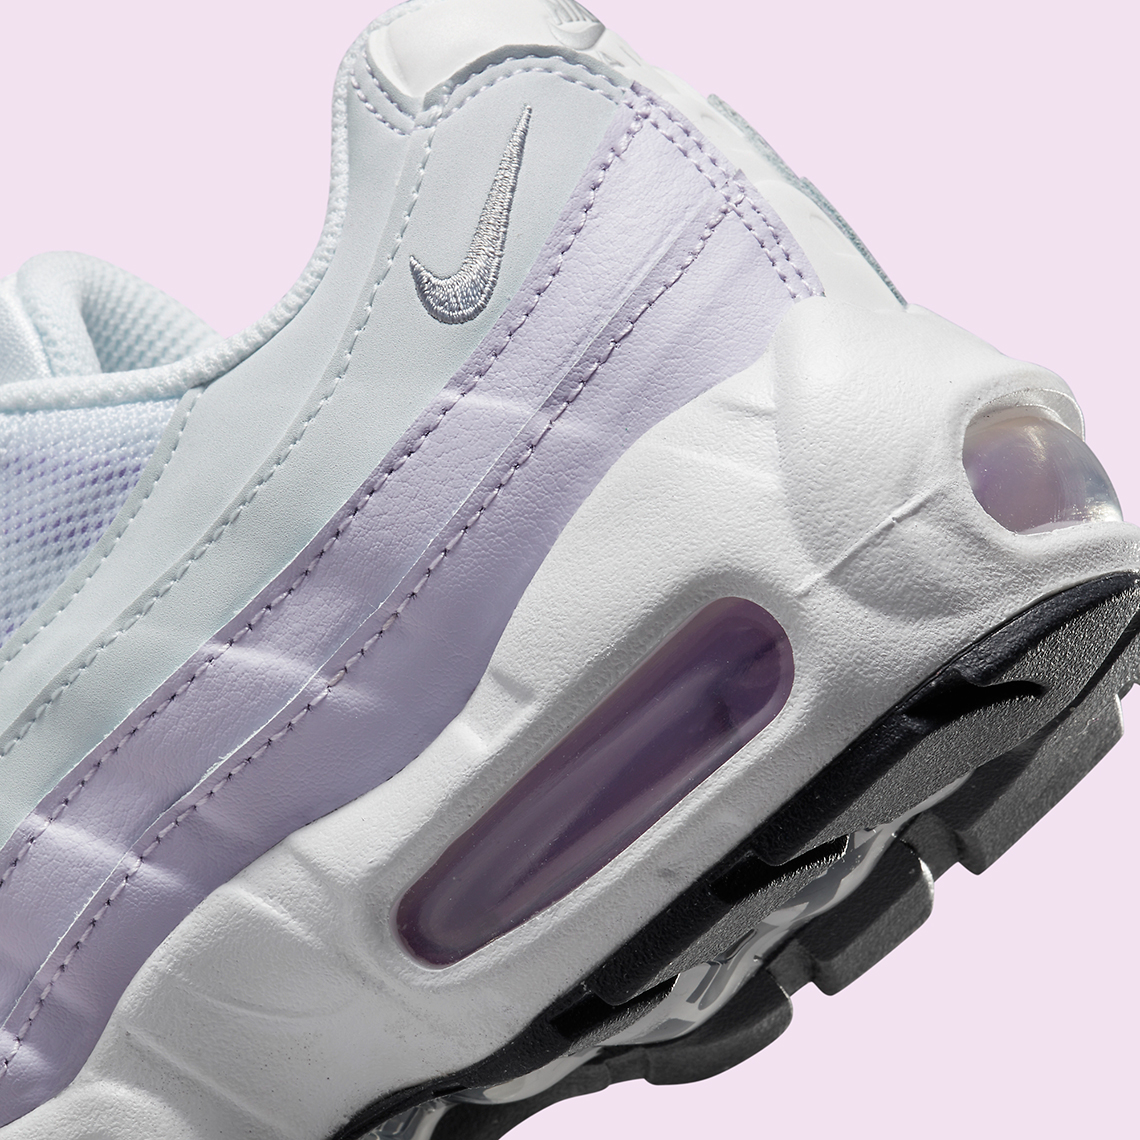 nike air max 95 gs violet frost CJ3906 108 7